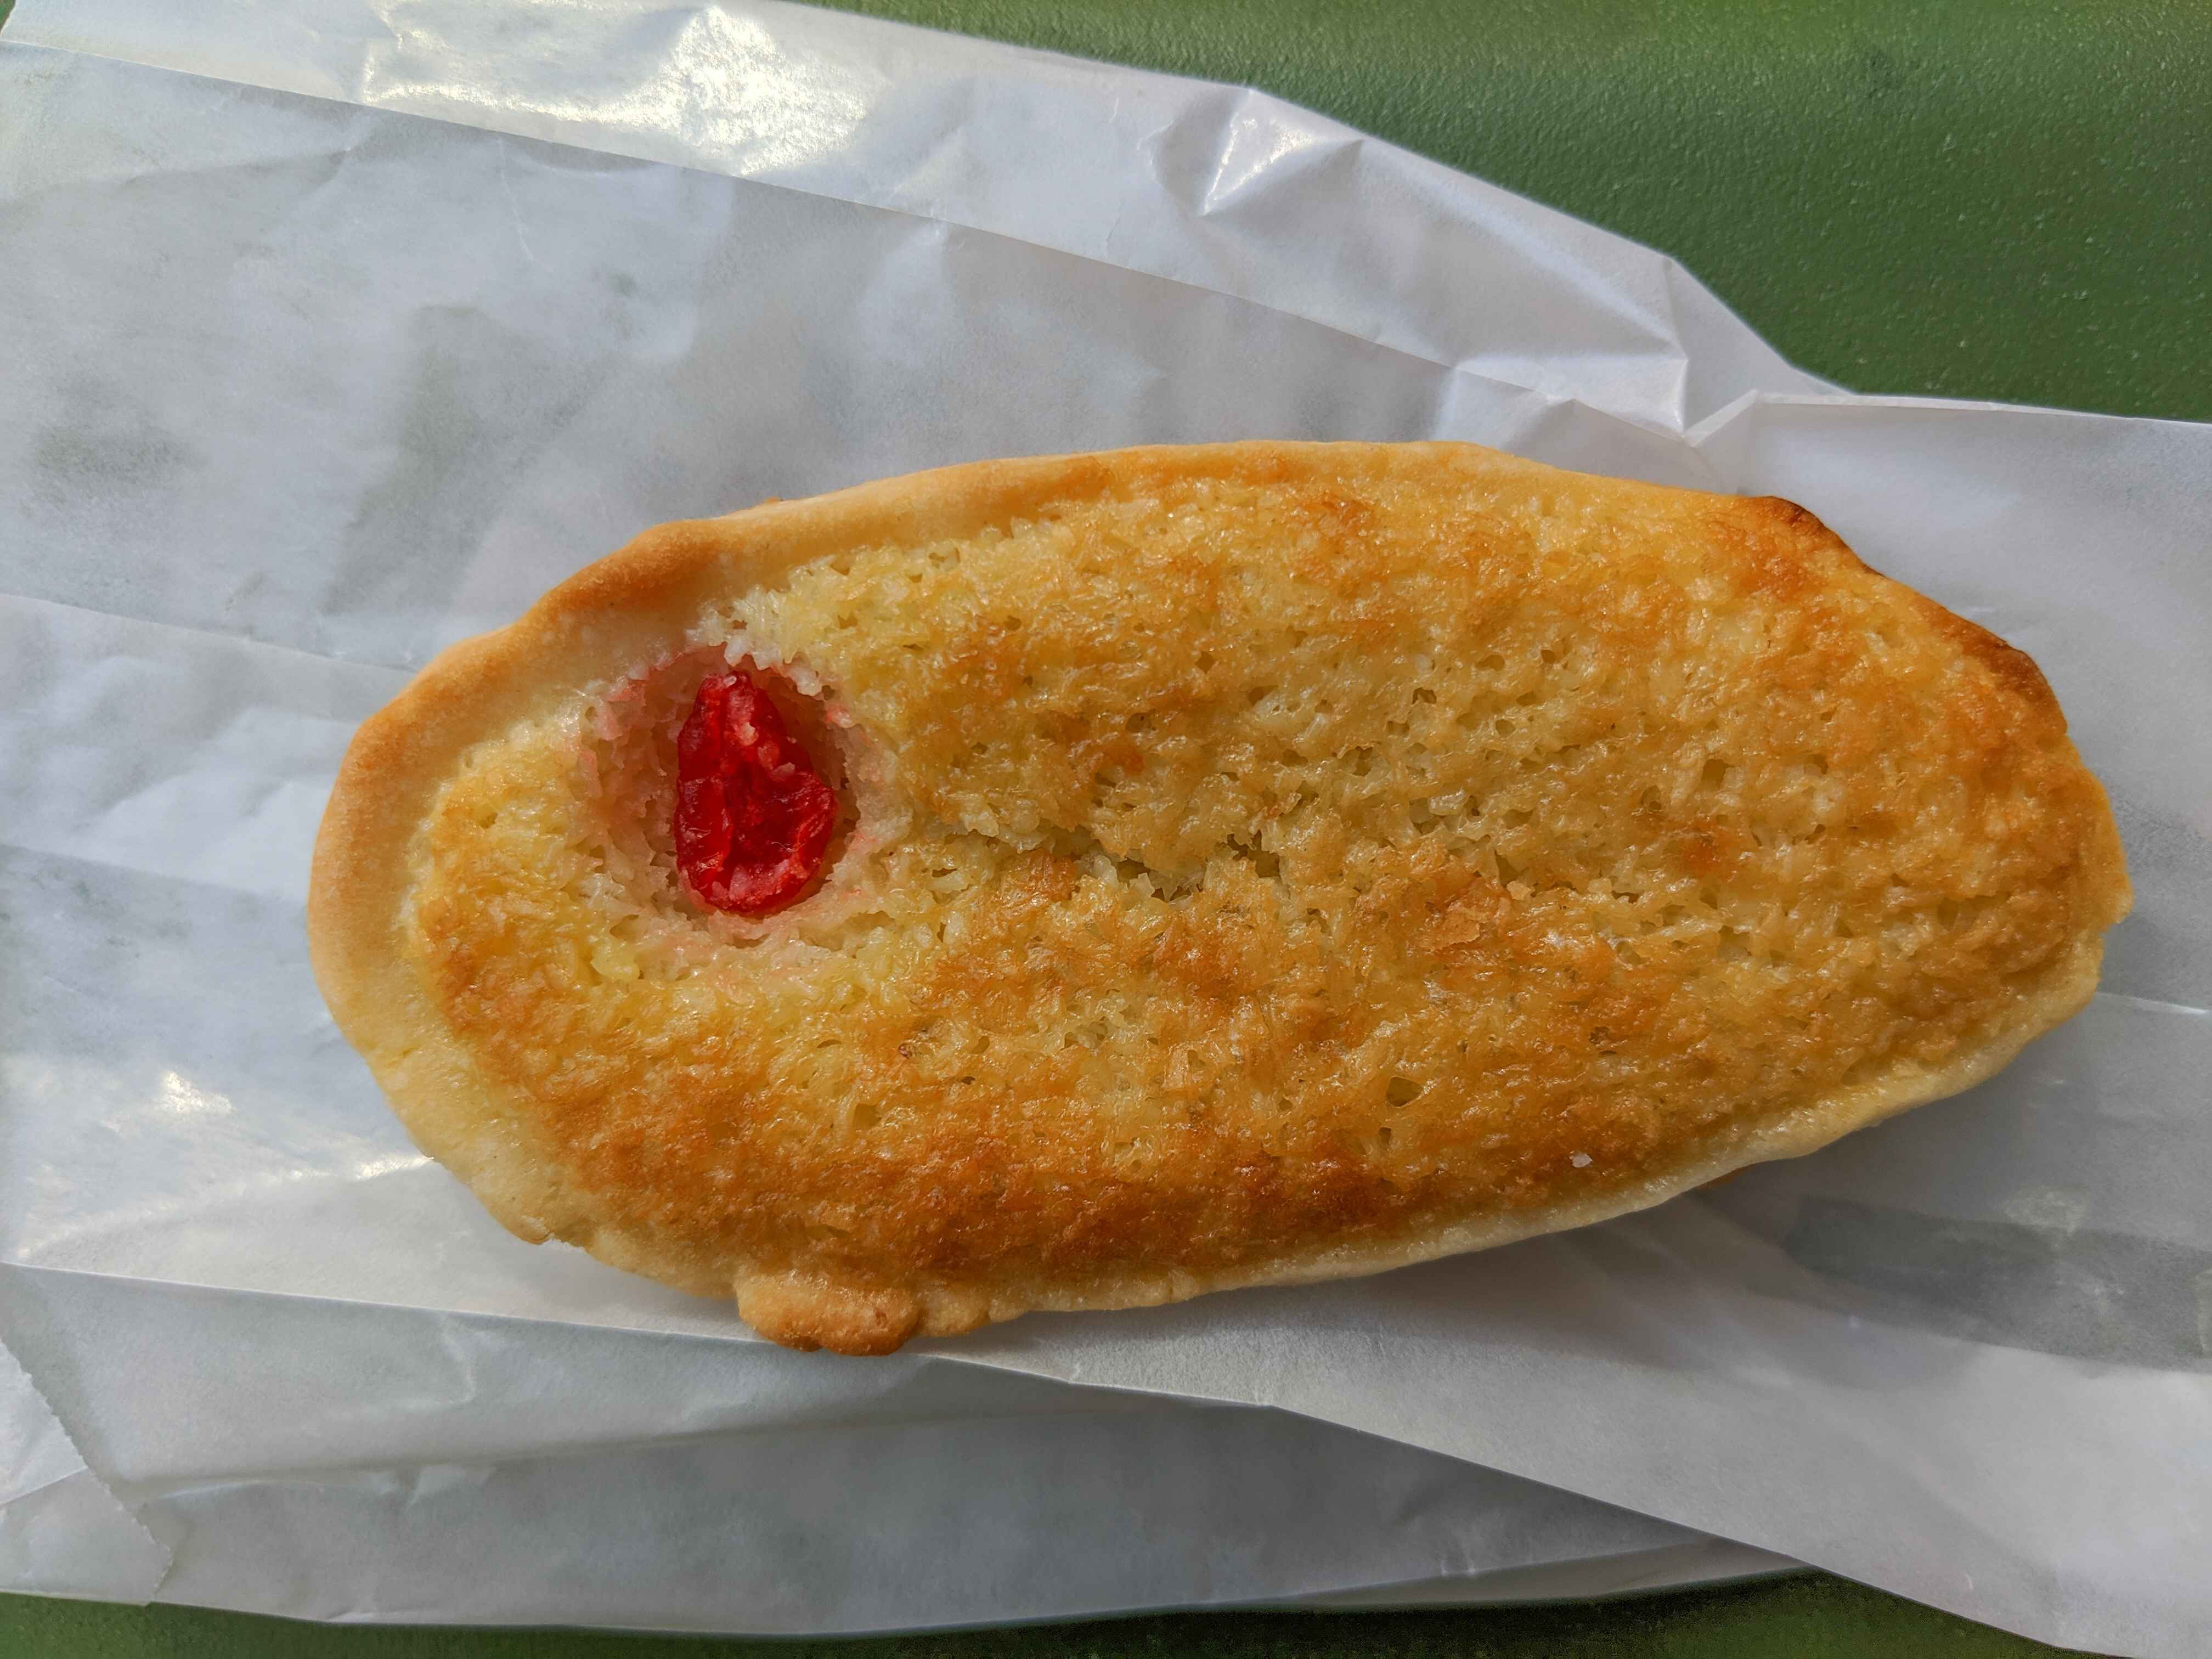 Overhead view of an oblong coconut tart with a maraschino cherry embedded in it, on a white paper bag on a green background